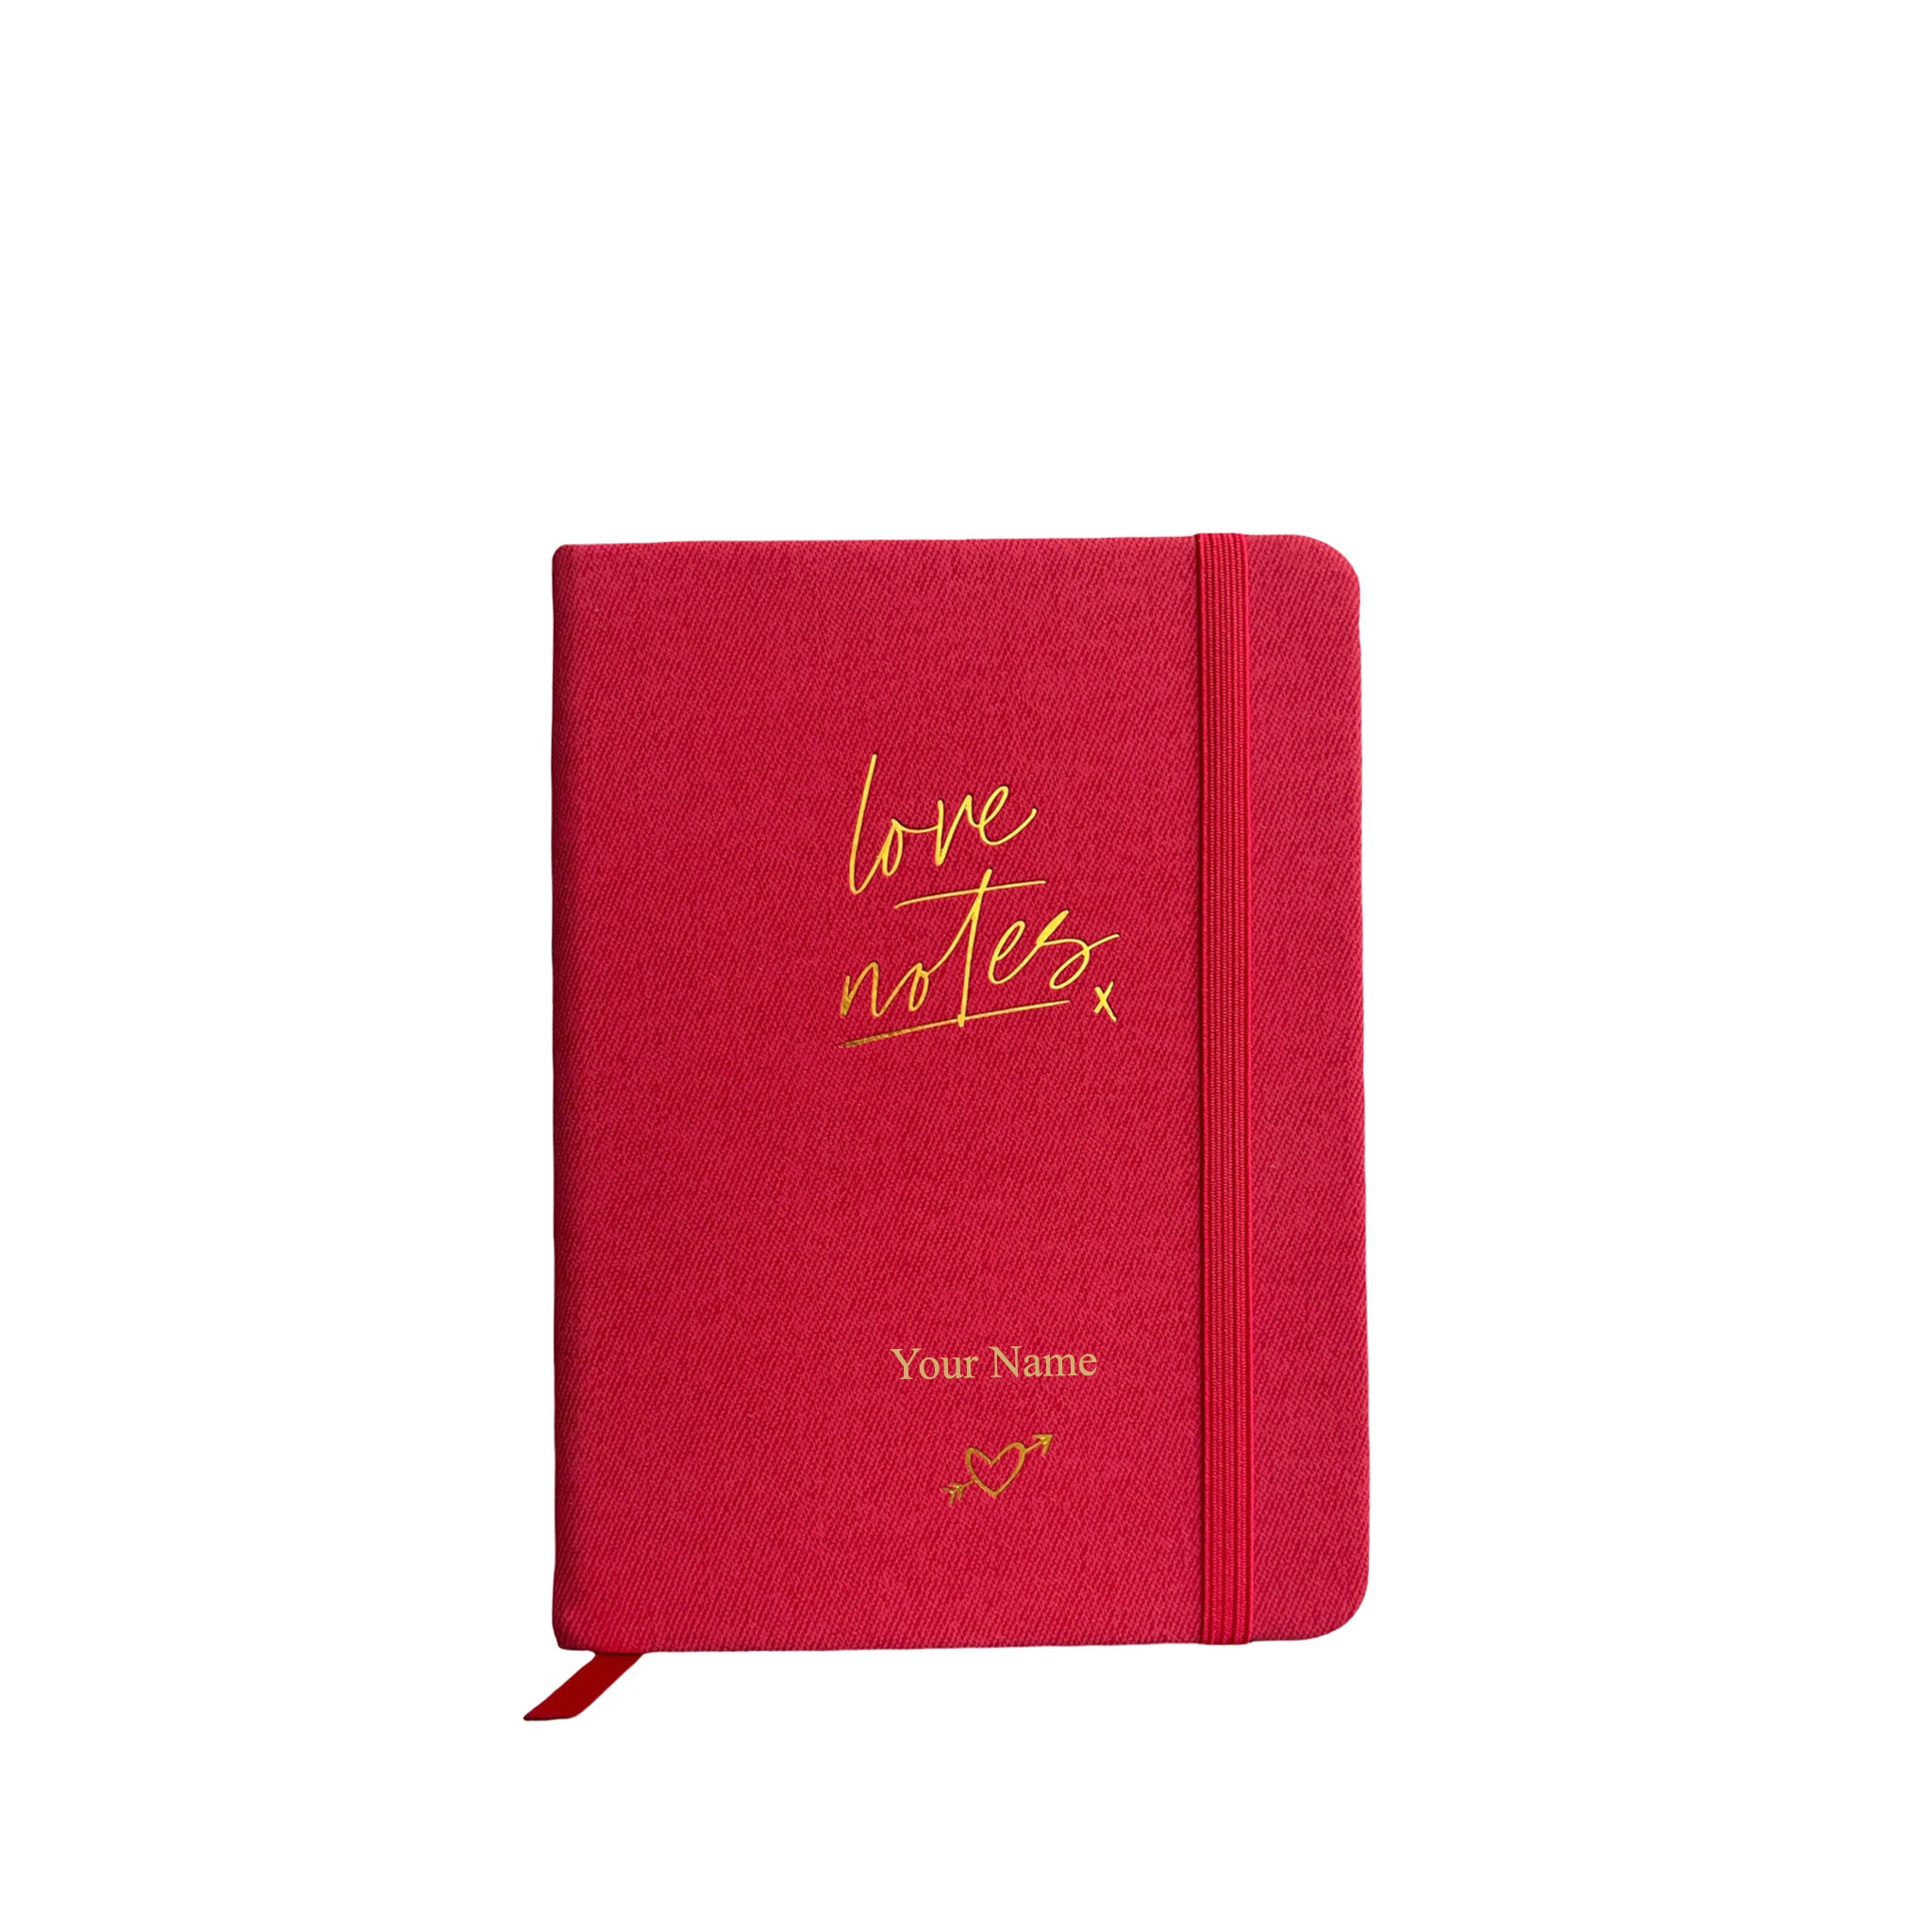 Notebook "Love Notes", A6, Red/Gold